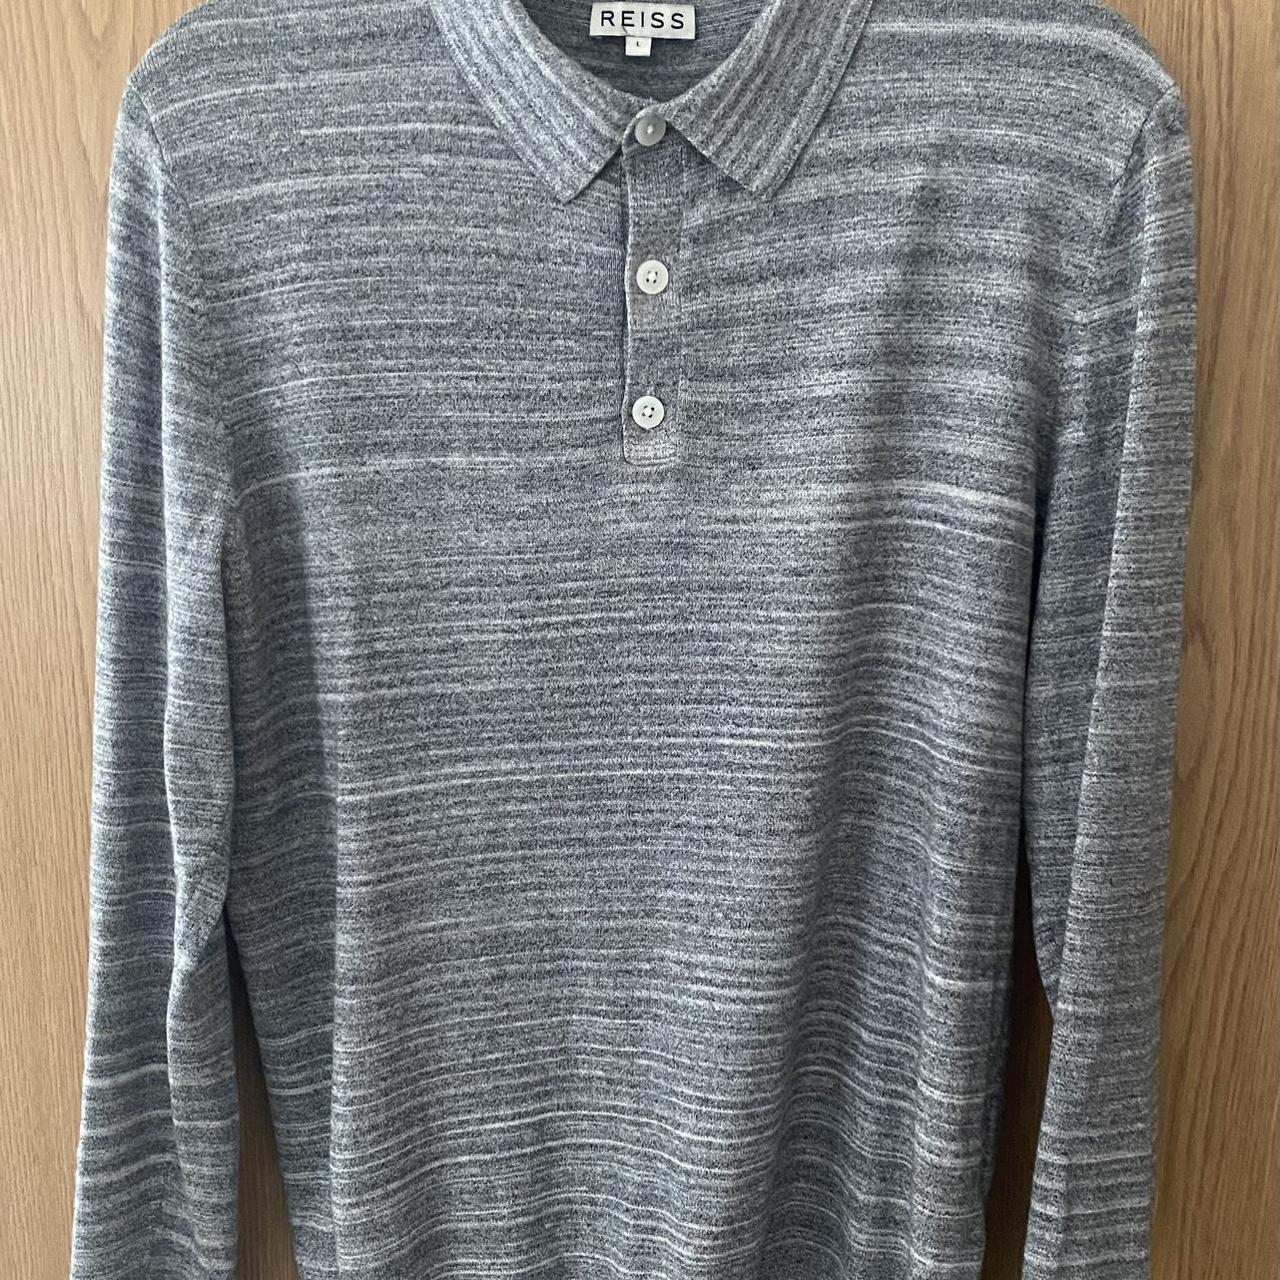 Reiss Men's Grey and Black Polo-shirts | Depop